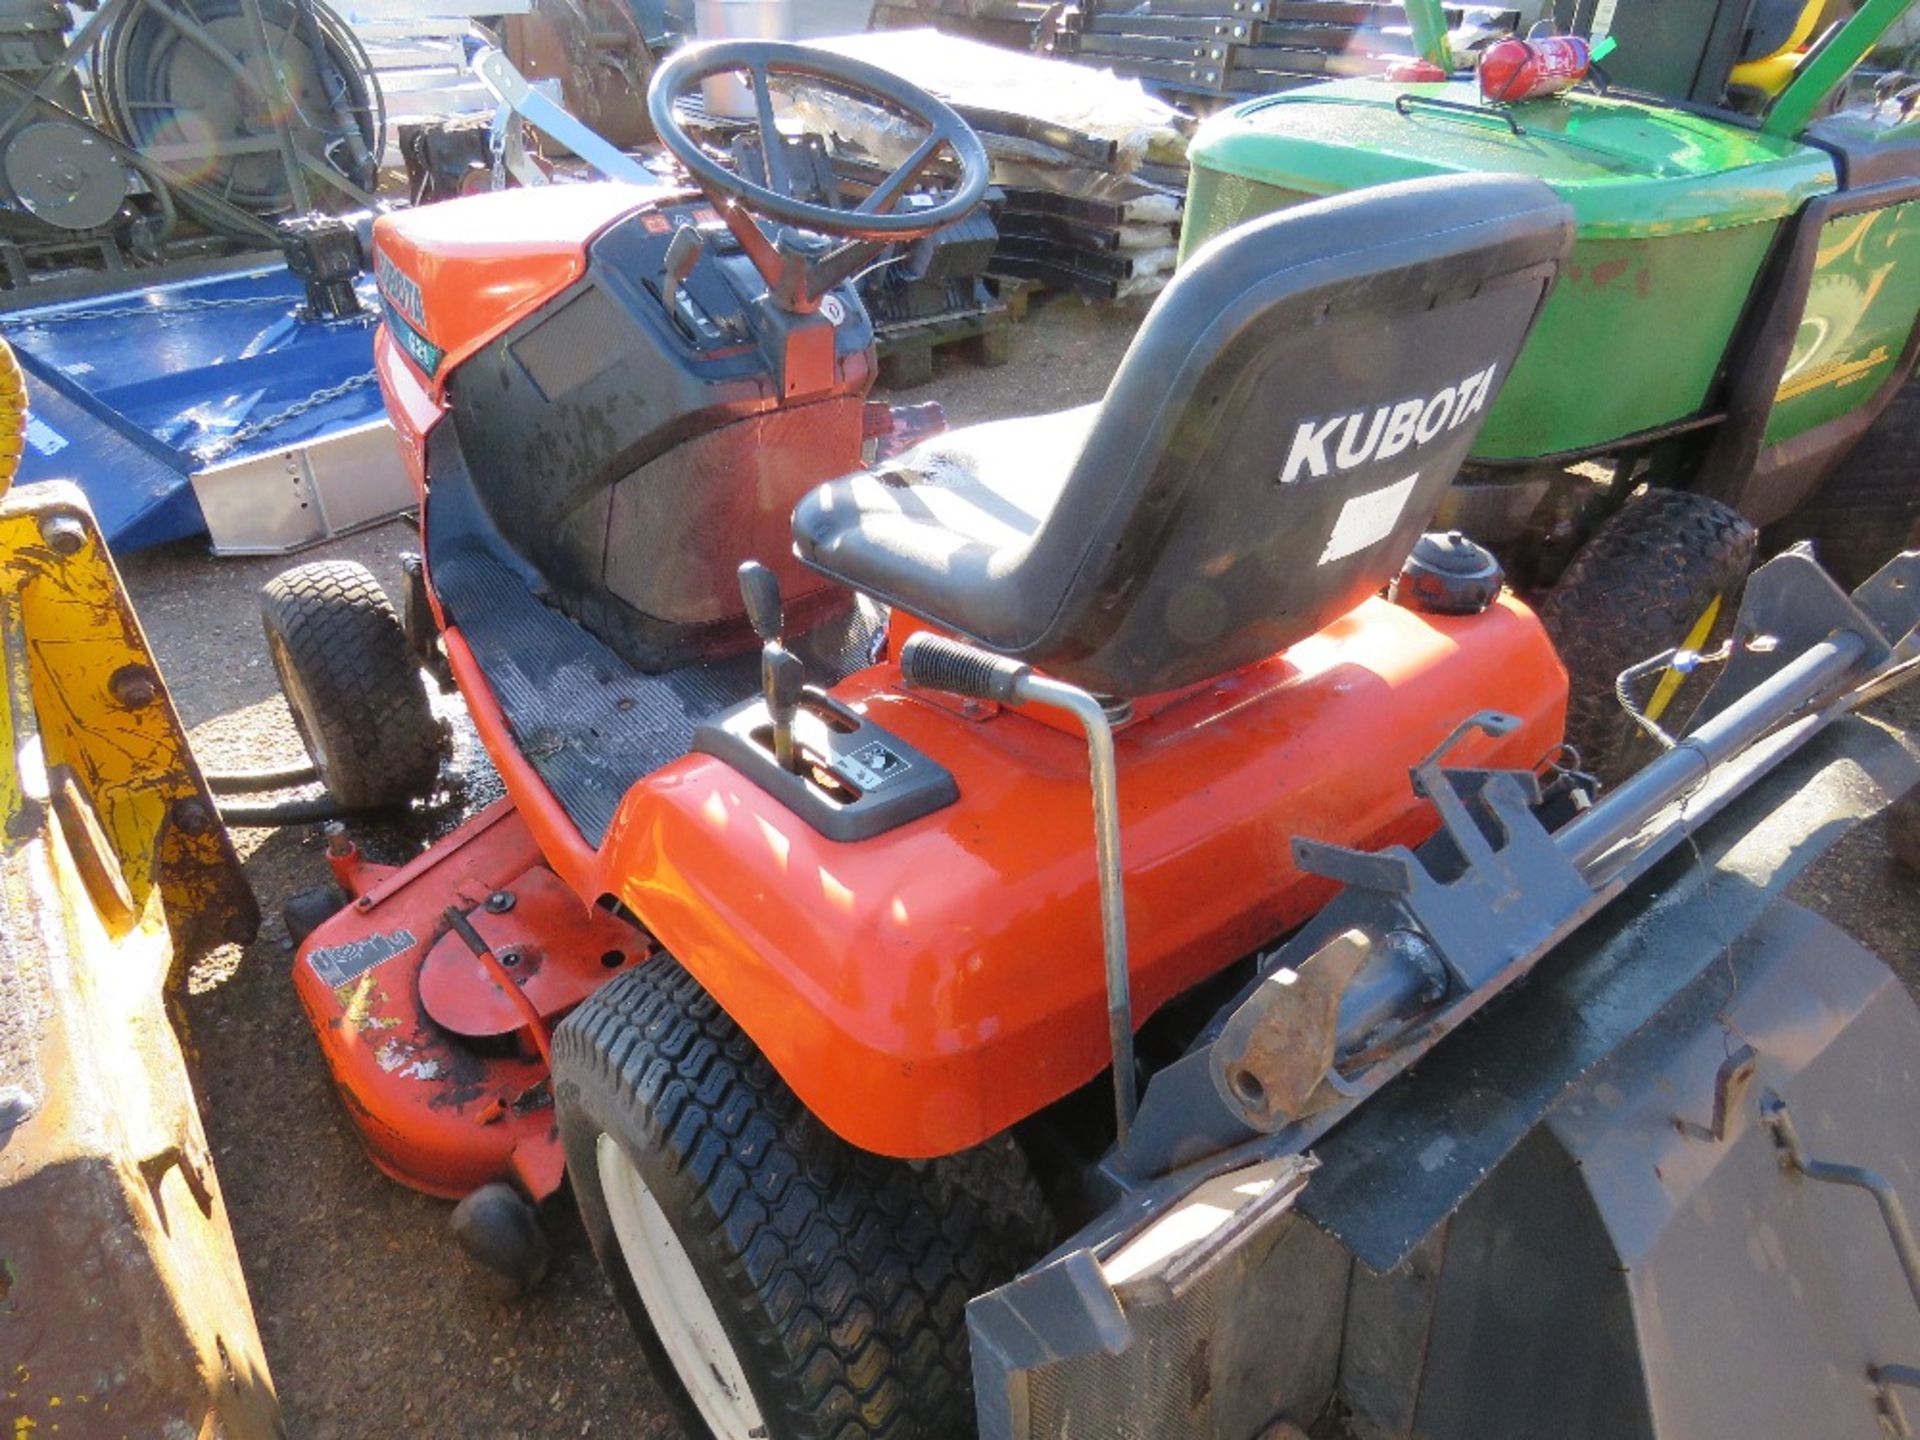 KUBOTA G21 RIDE ON TRACTOR MOWER. YEAR 2004. 1240 REC HRS. SN:10519. WHEN TESTED WAS SEEN TO DRIVE, - Image 5 of 7